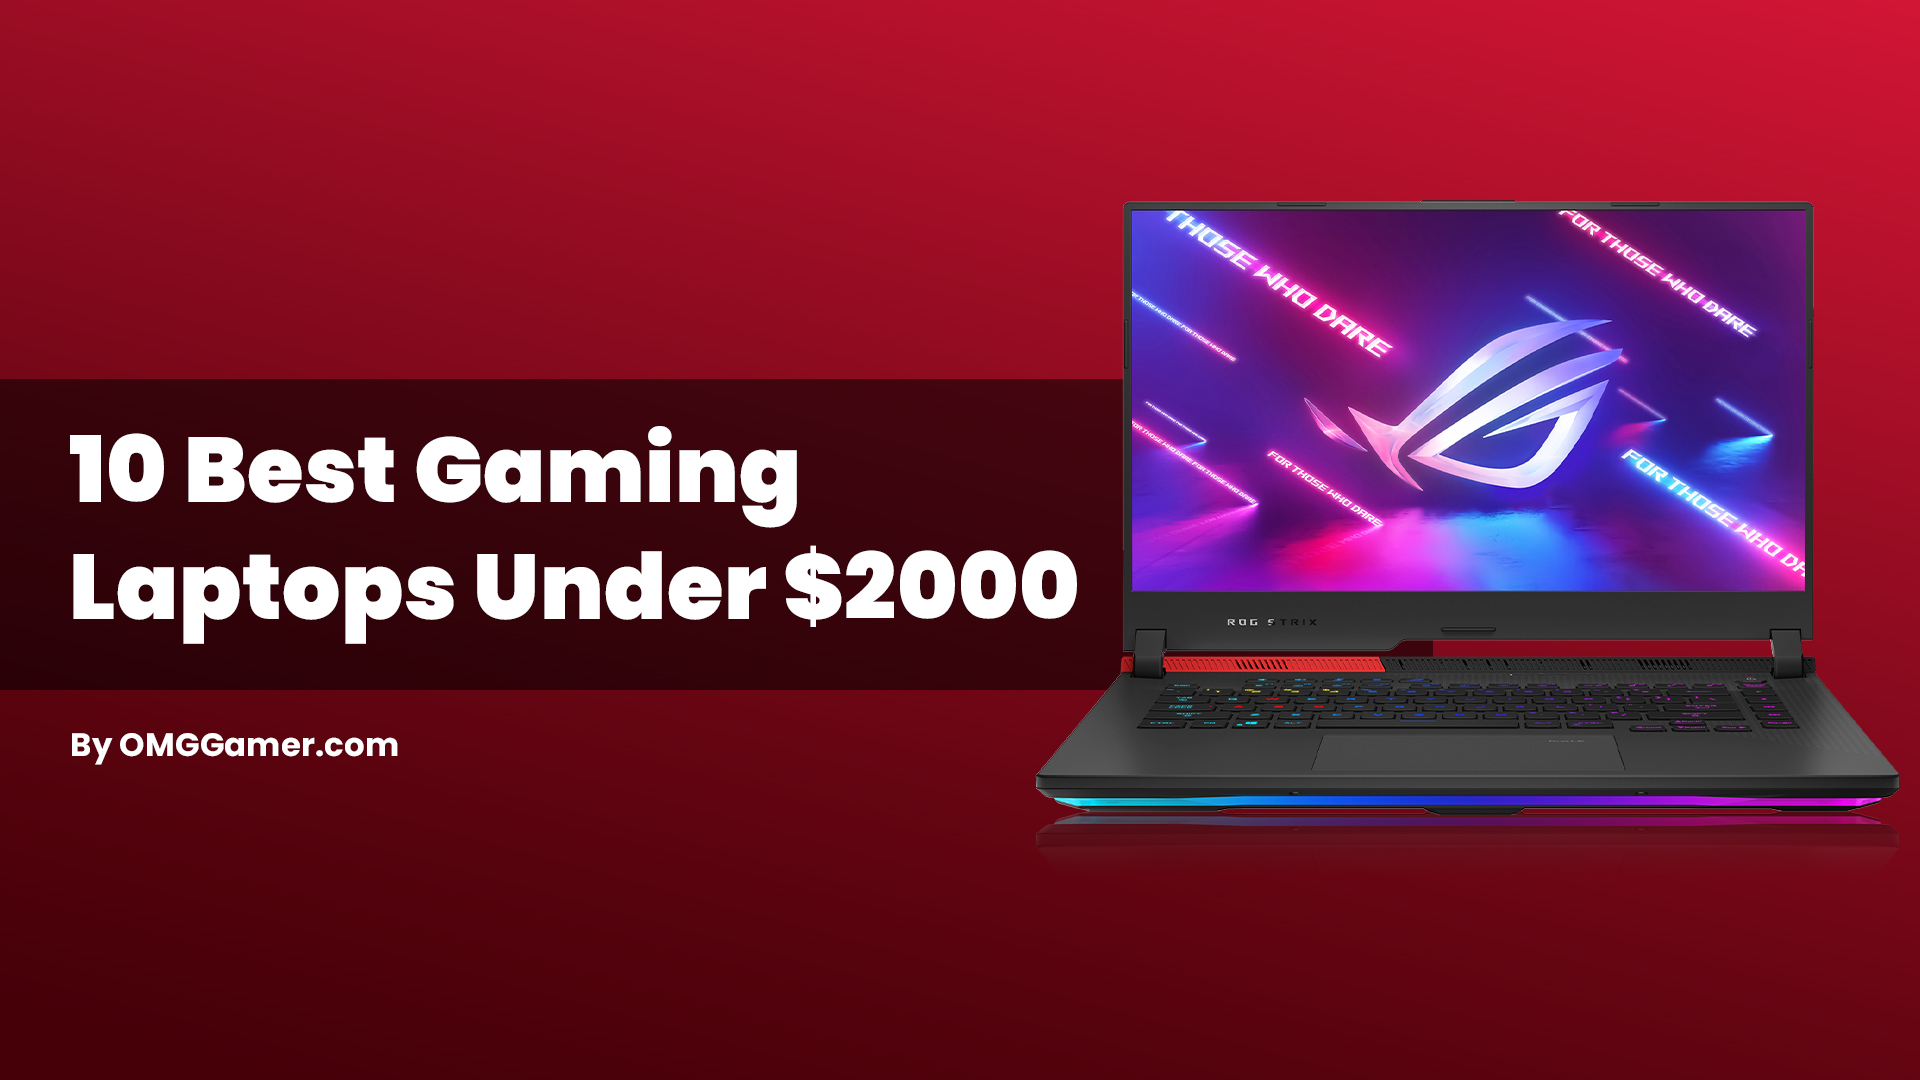 10 Best Gaming Laptops Under $2000 [Gamers Choice]